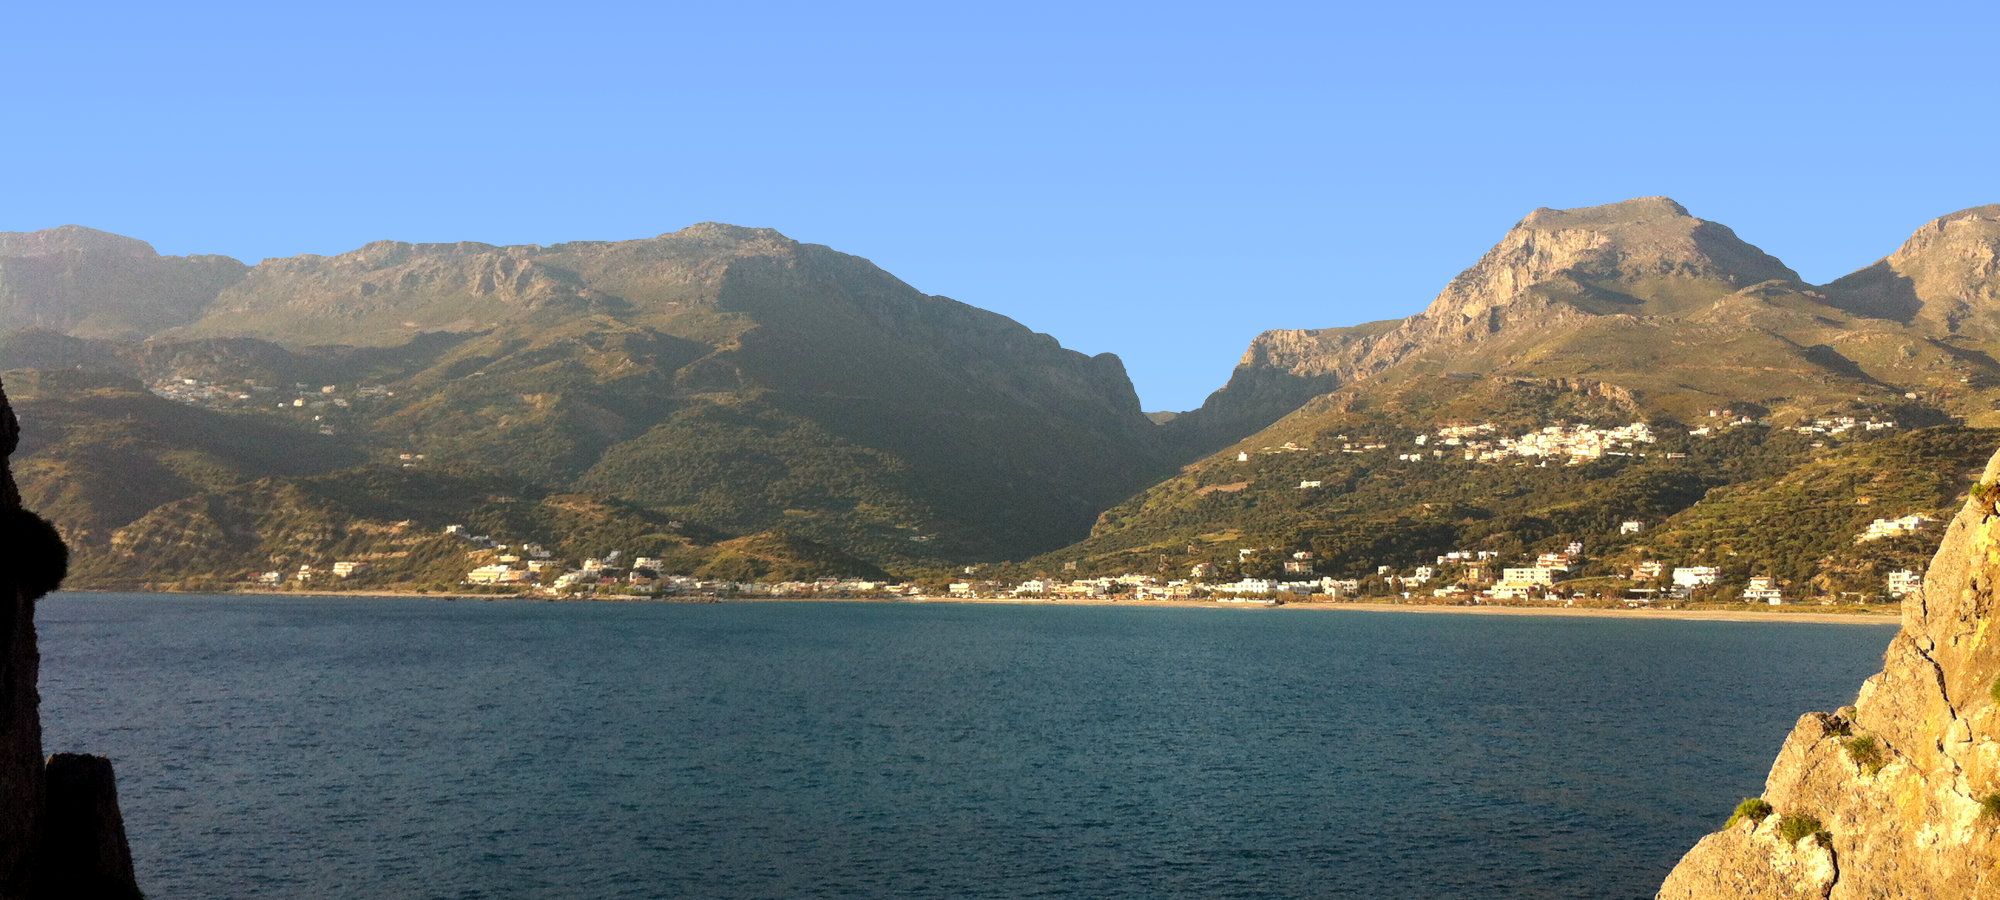 Plakias Bay and the Mountains